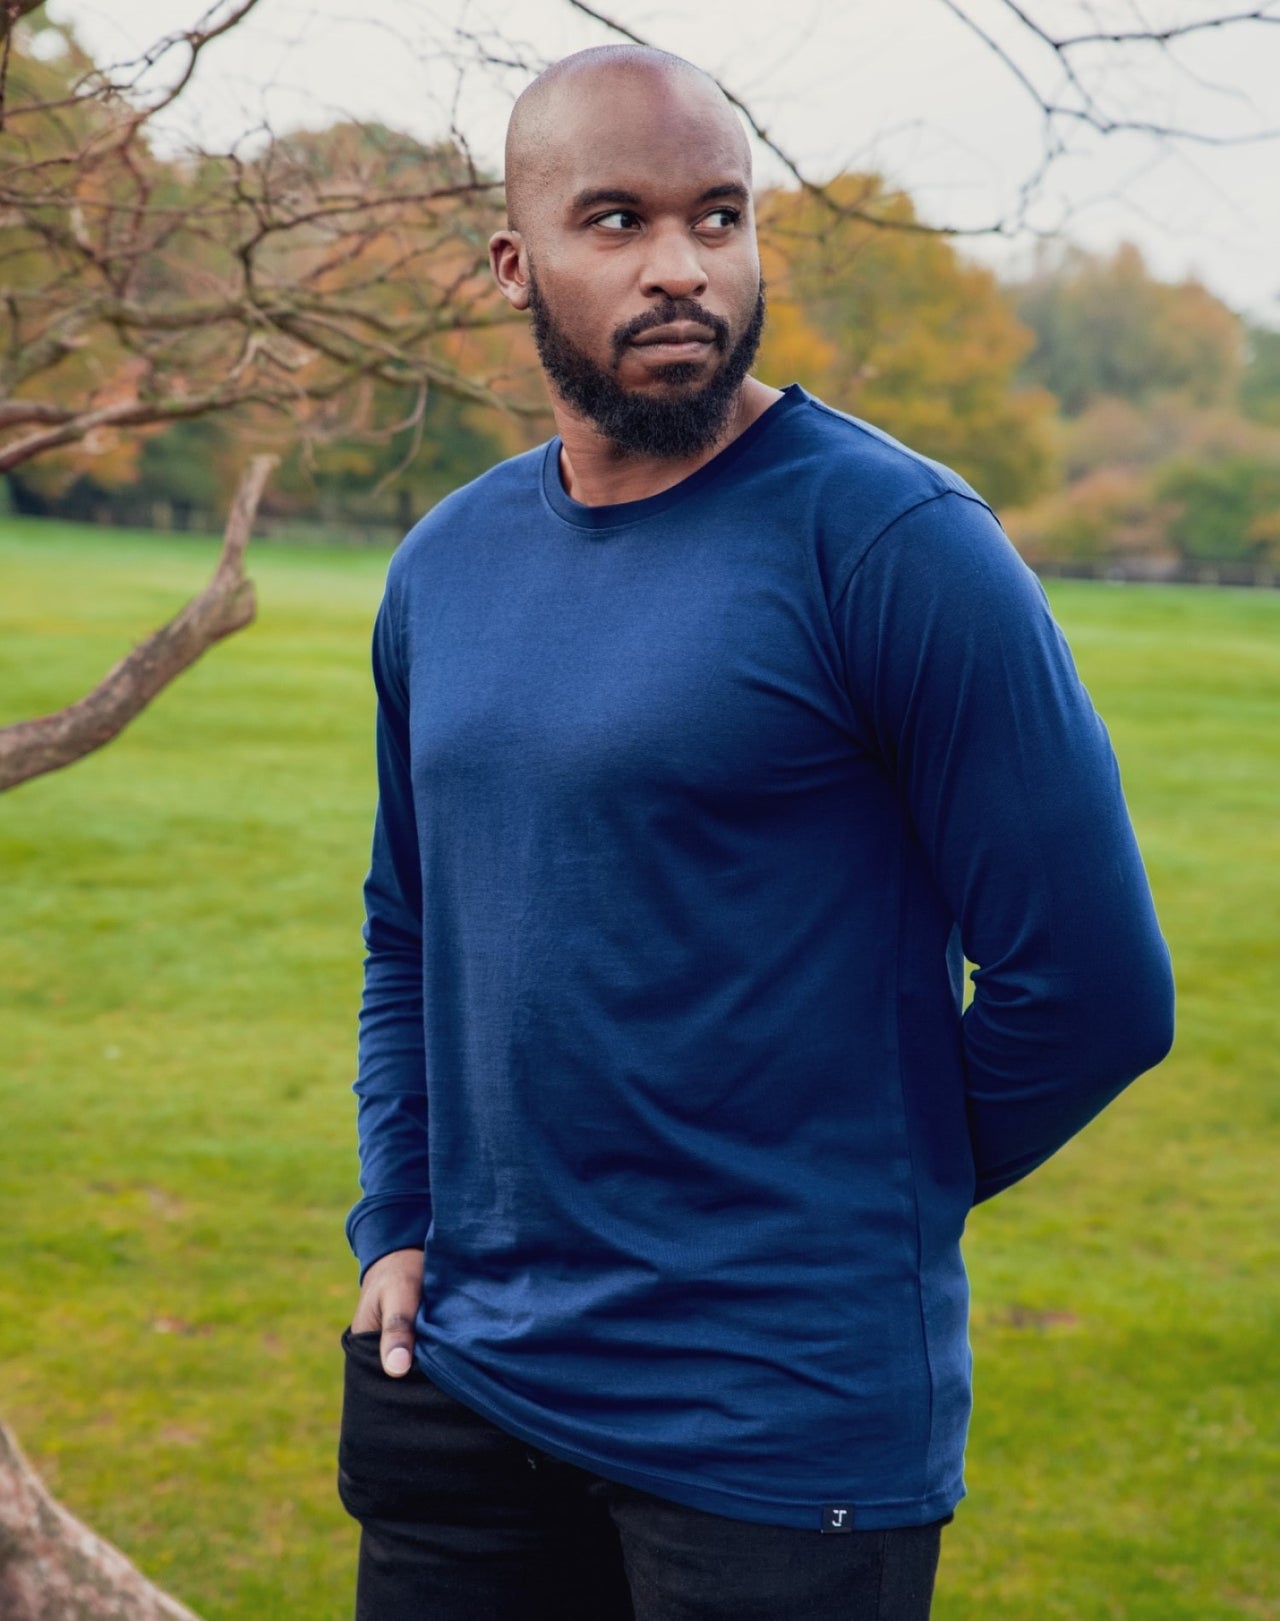 A tall athletic guy wearing a long sleeve navy tall t-shirt in a park with one hand in pocket.